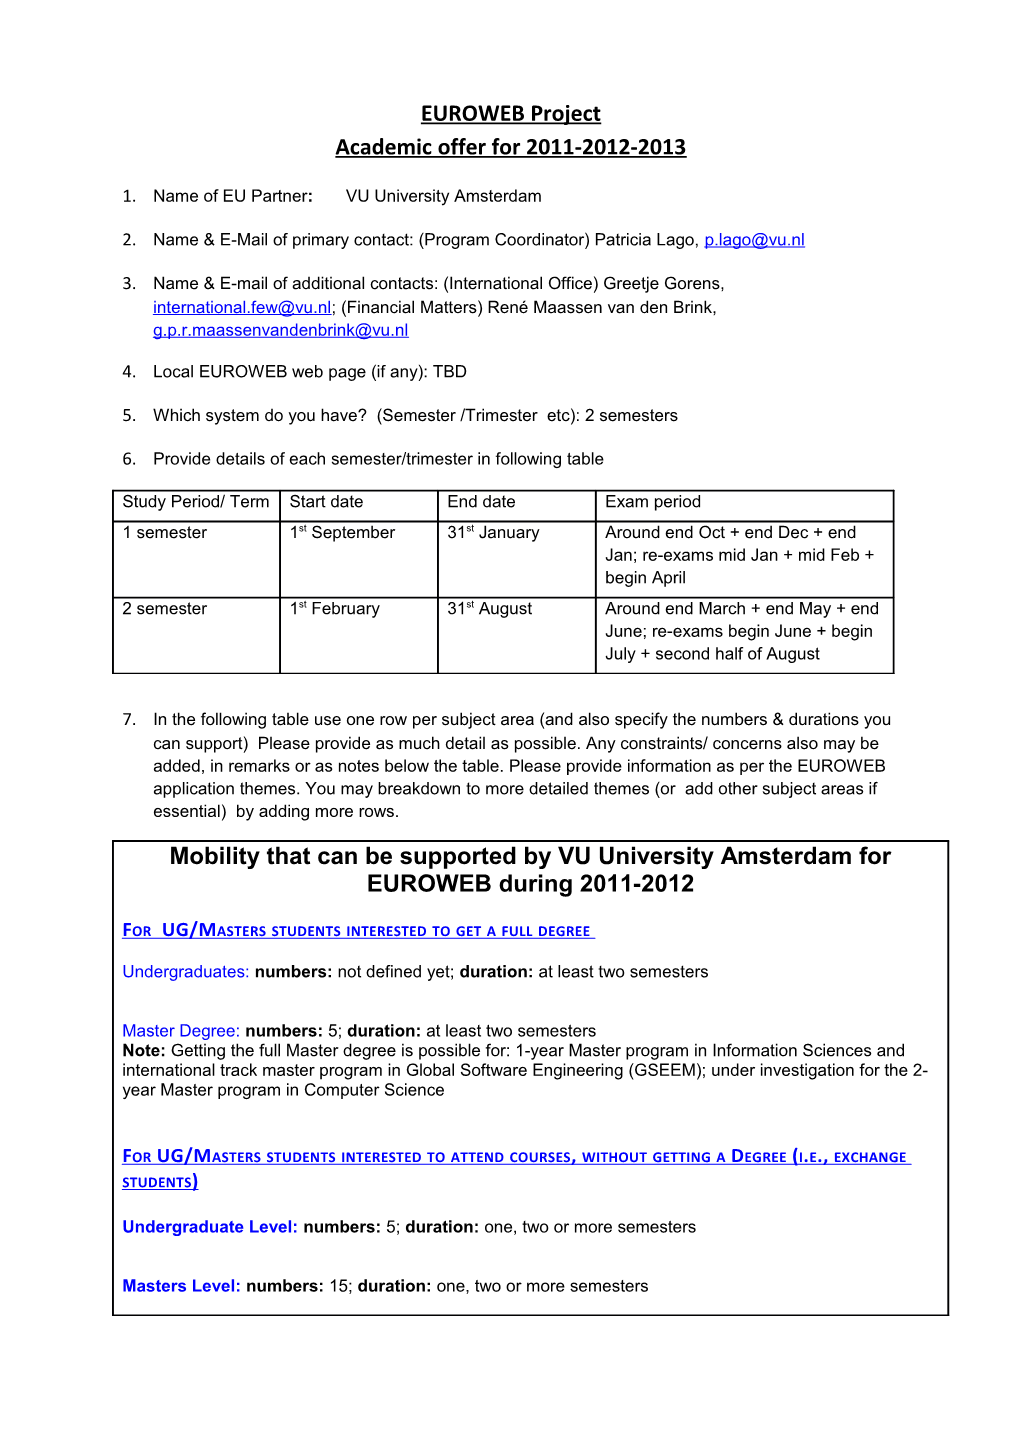 Eurowebproject Academic Offer for 2011-2012-2013